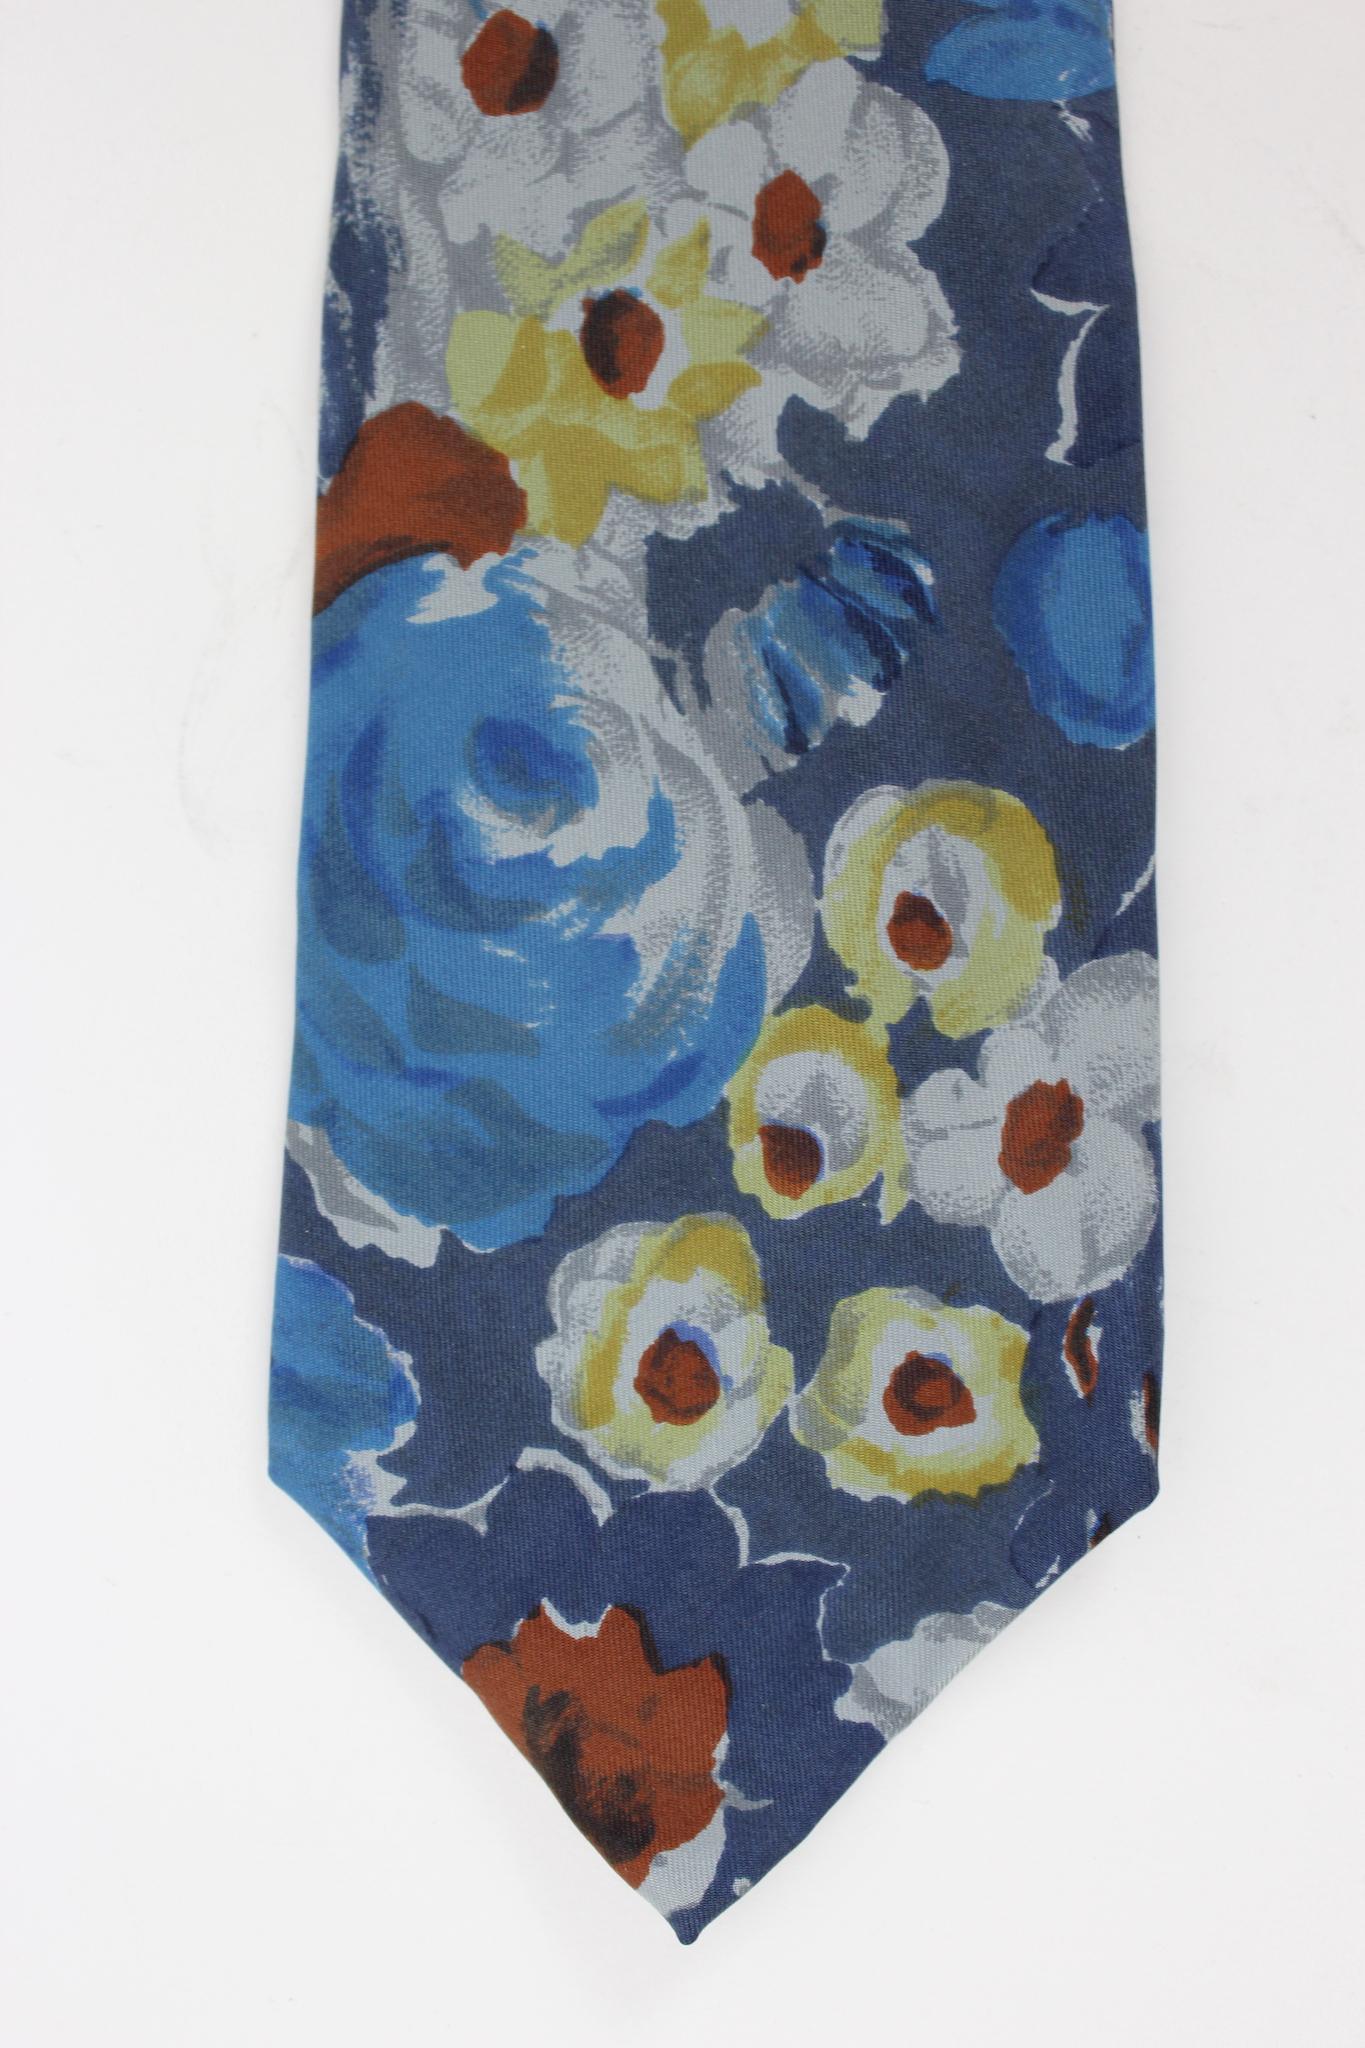 Kenzo vintage 90s floral tie. Blue background with red and beige floral designs. 100% silk fabric. Made in Italy.

Length: 142 cm
Width: 10 cm